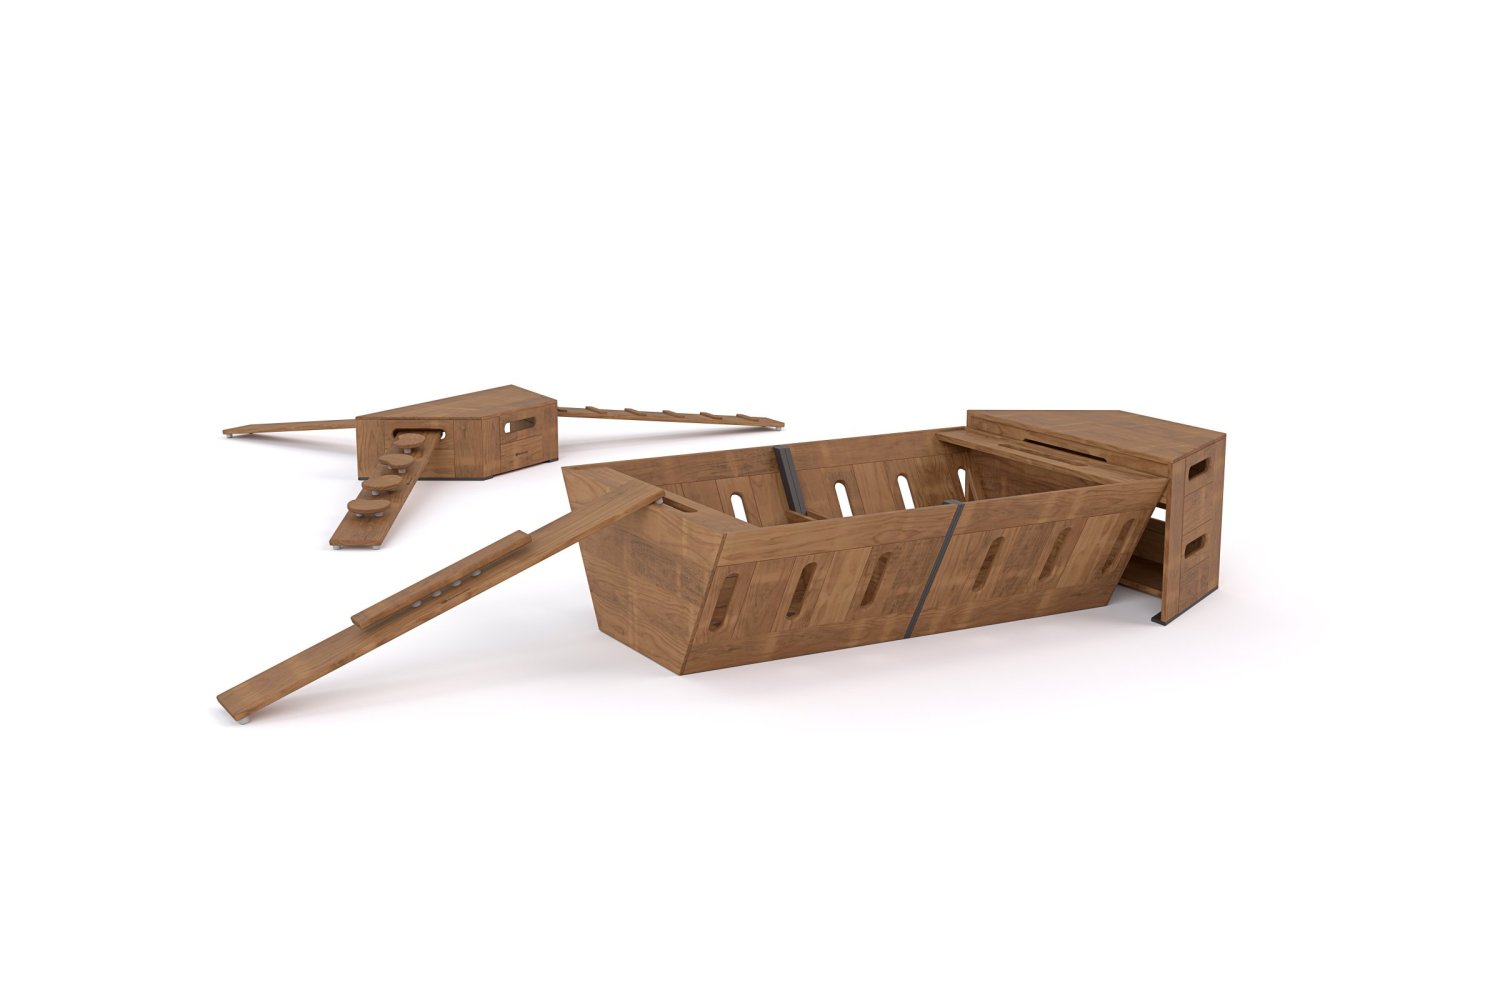 Outdoor play boxes that turn into Boat for preschools and kindergartens